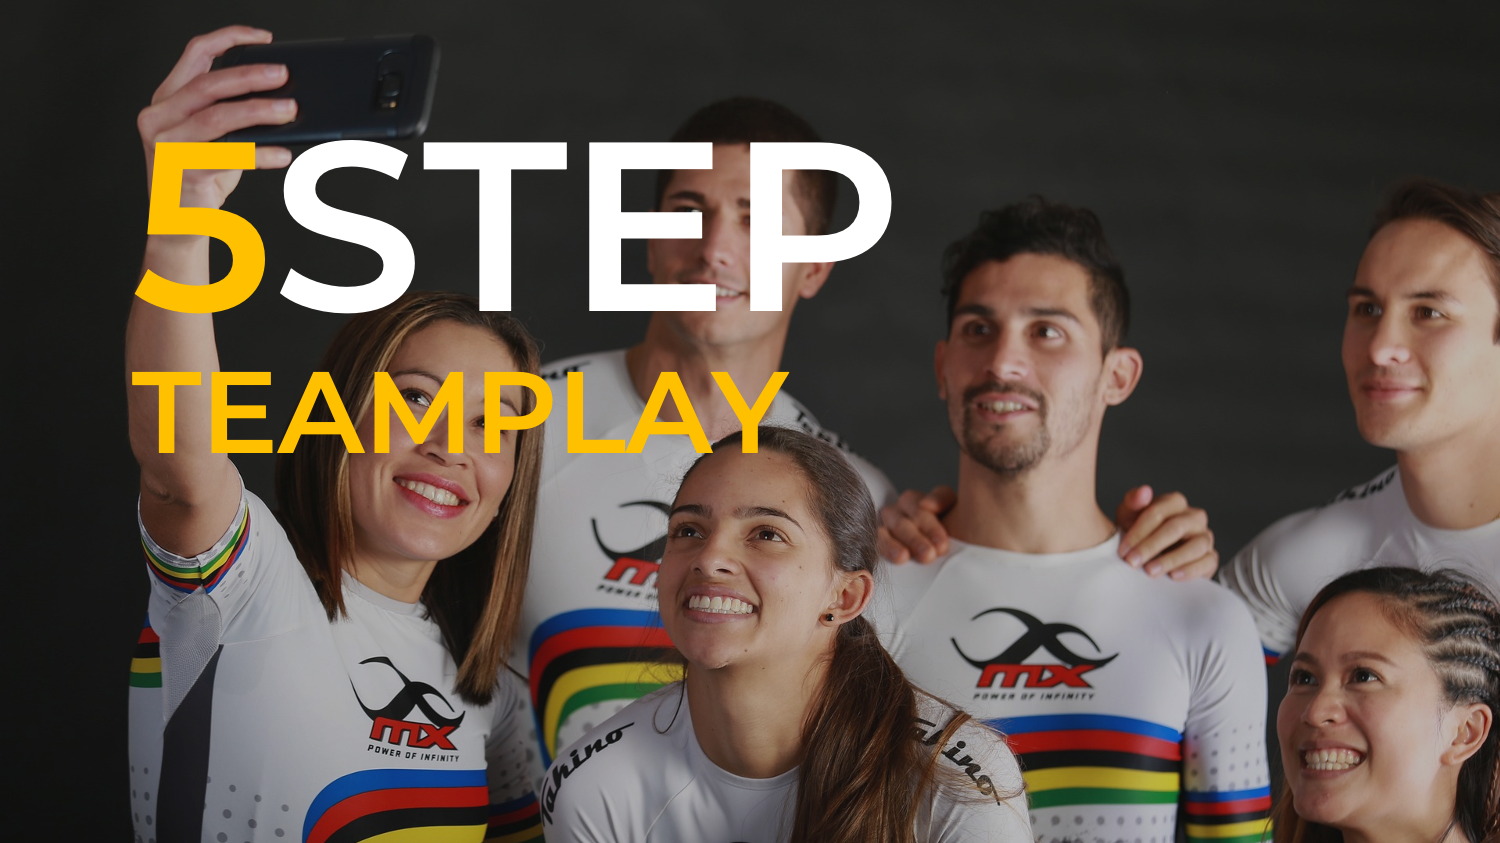 5STEP-Teamplay _Header _SPORTS02.png